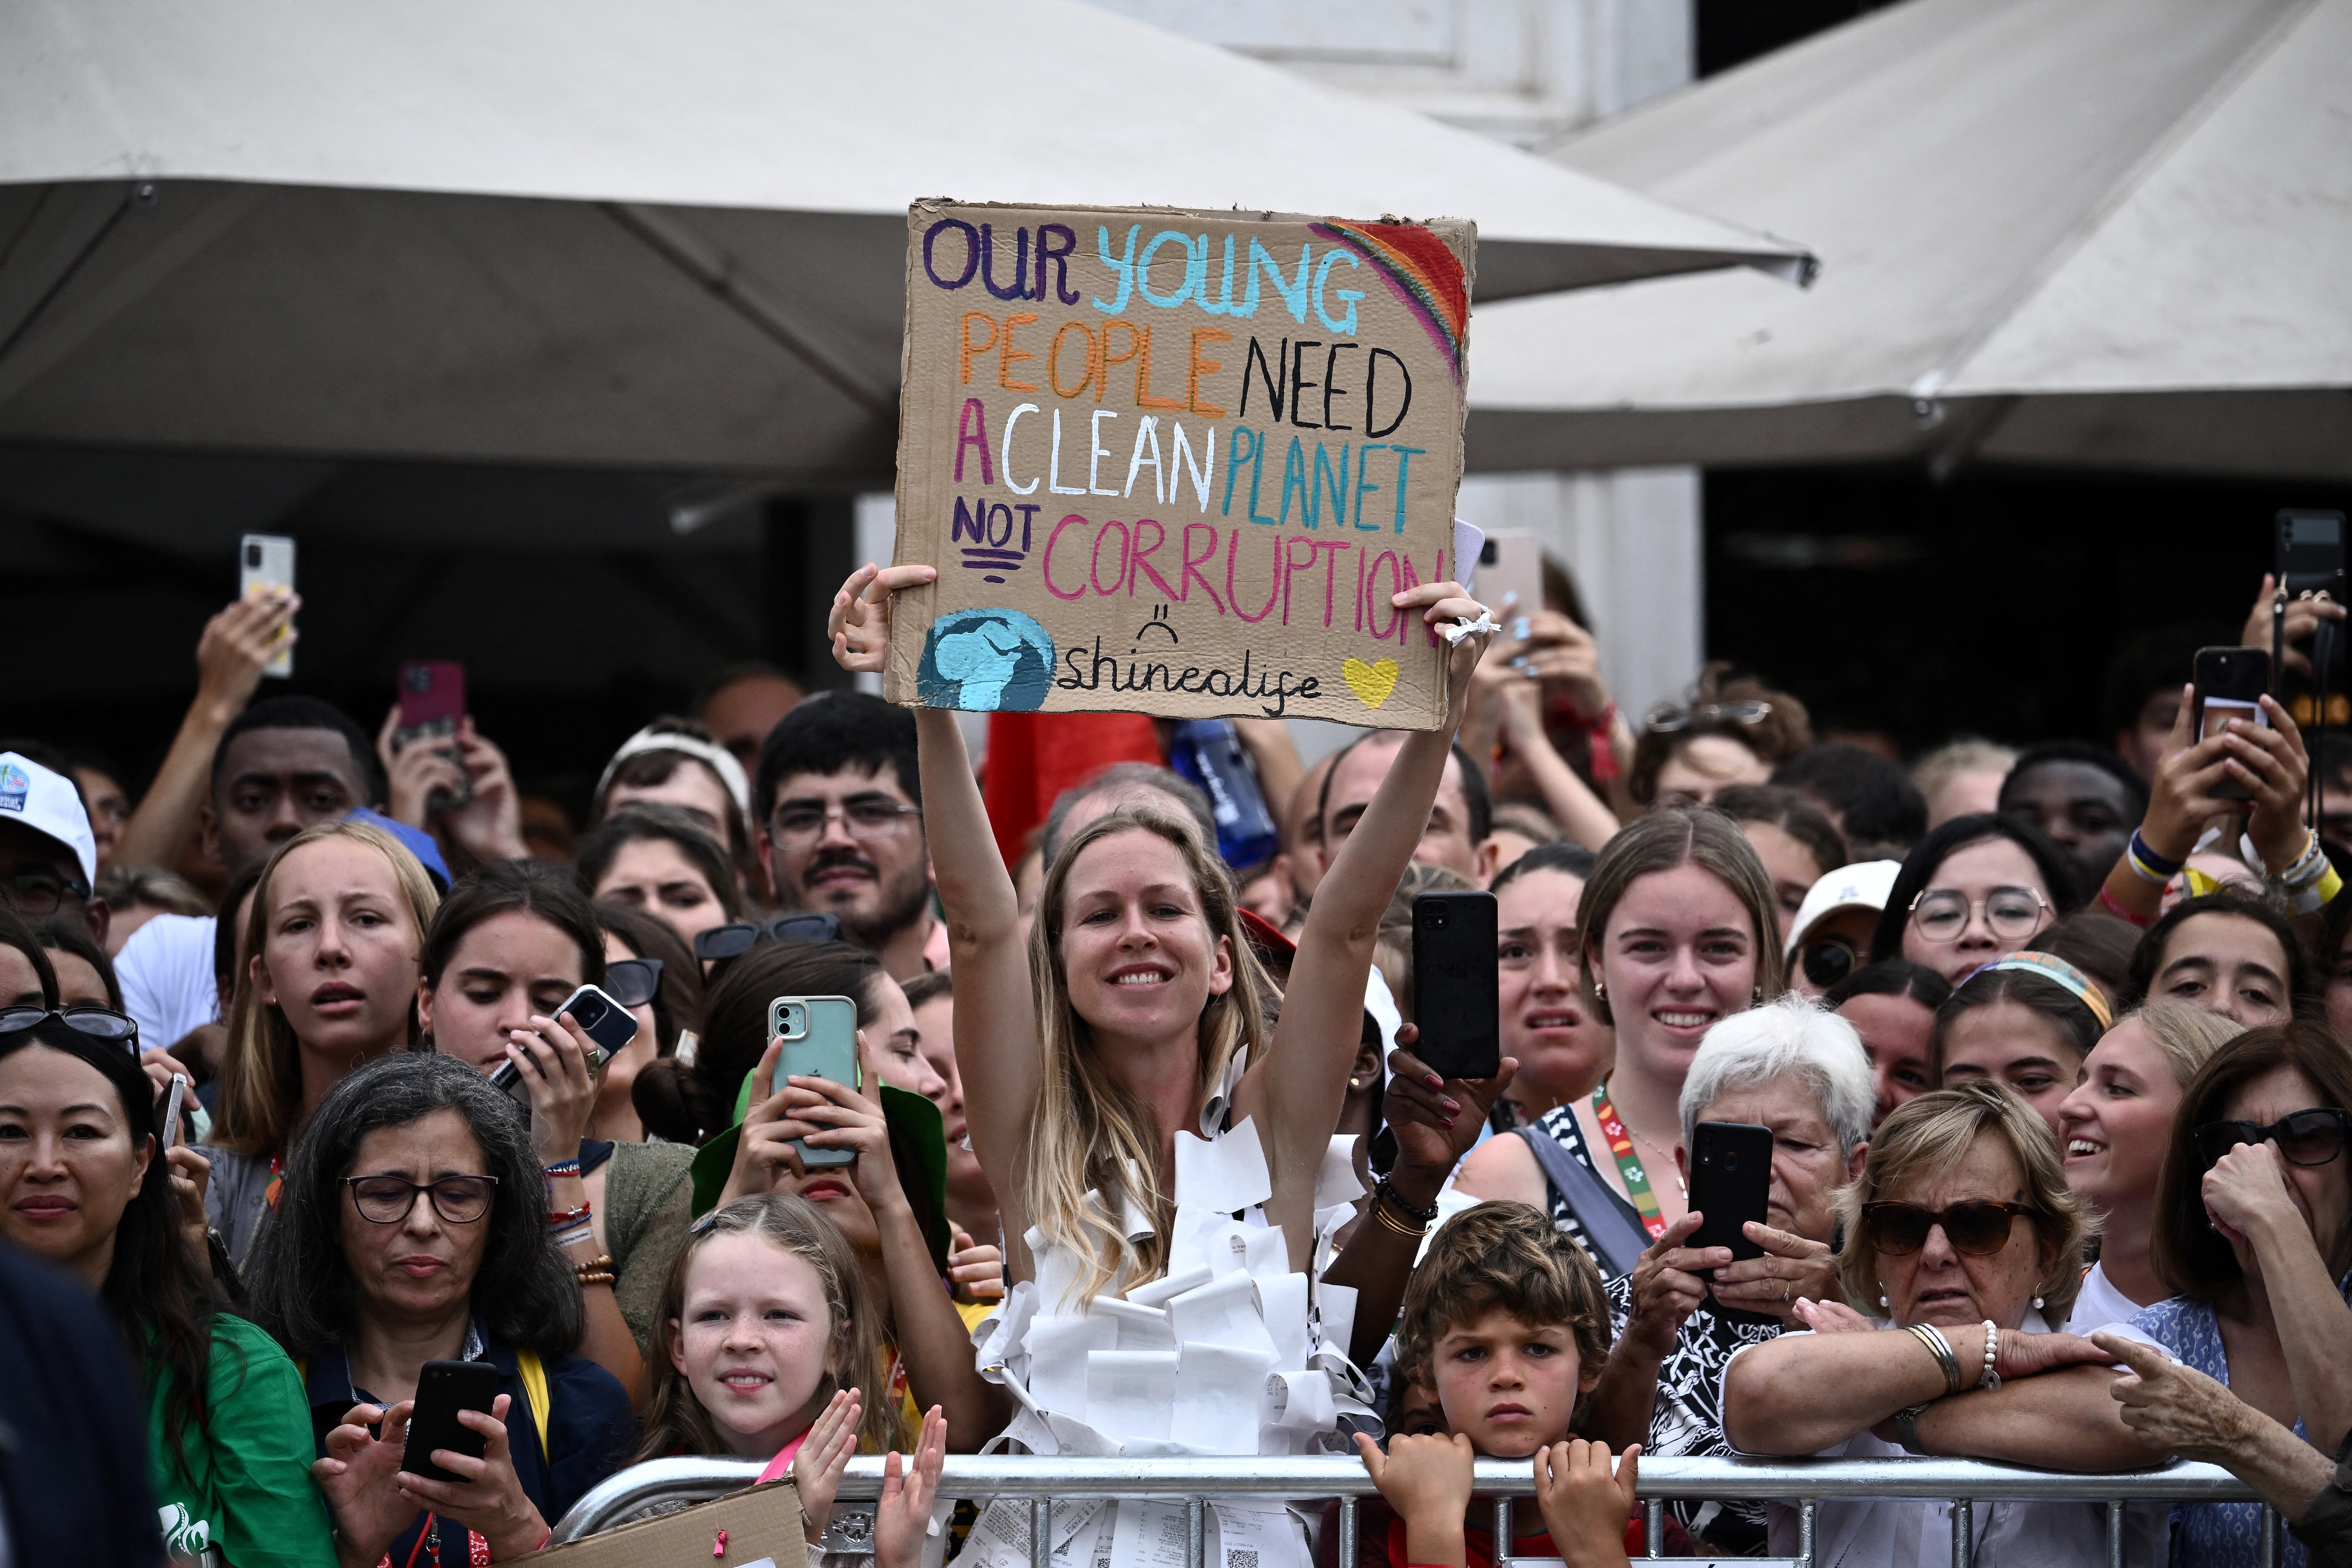 A woman holds a sign that says 